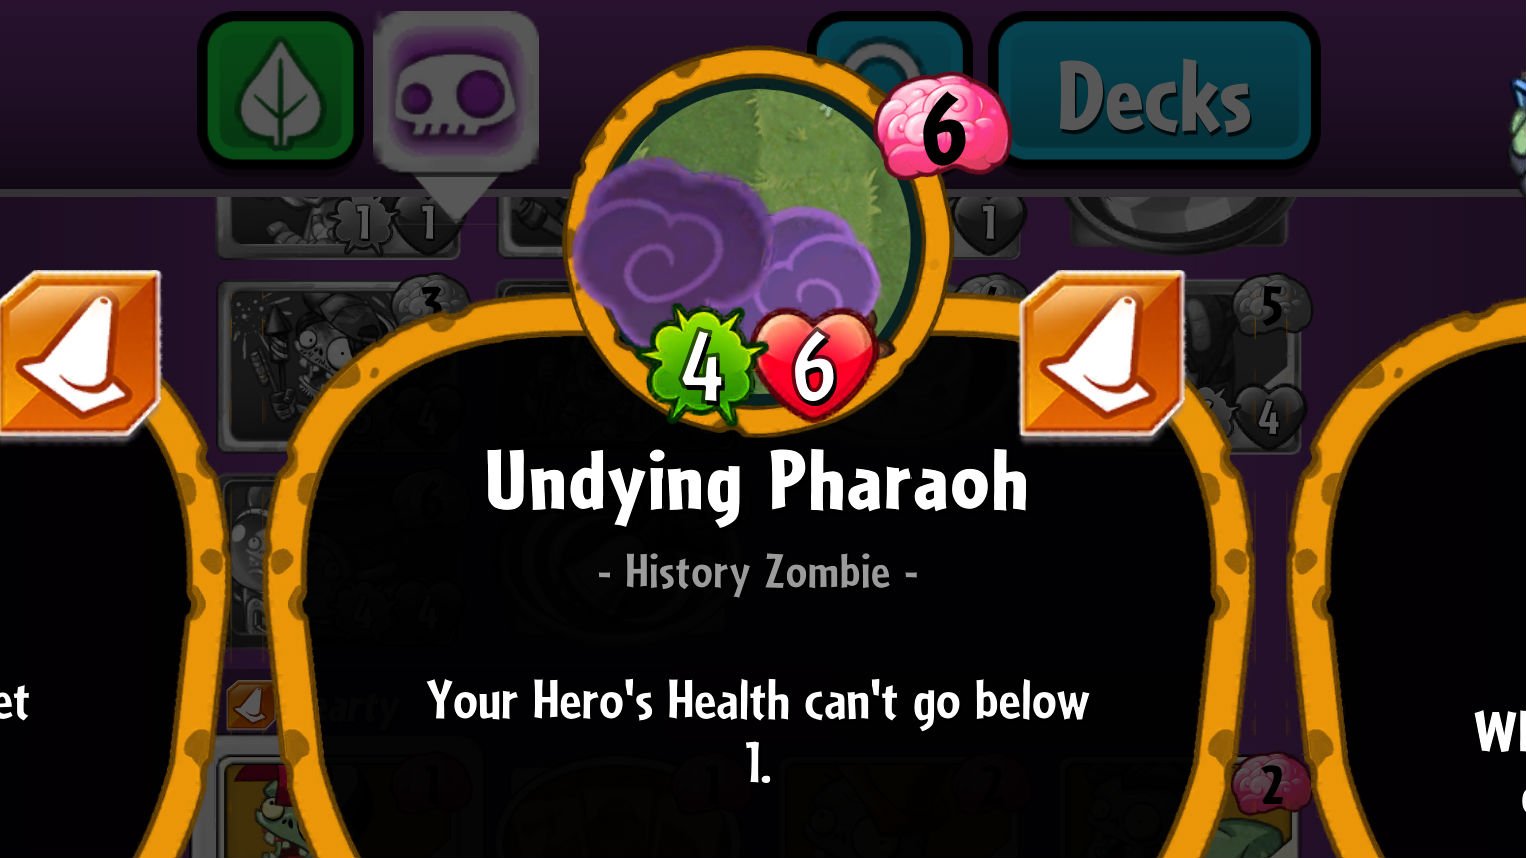 Plants vs. Zombies Heroes Undying Pharaoh